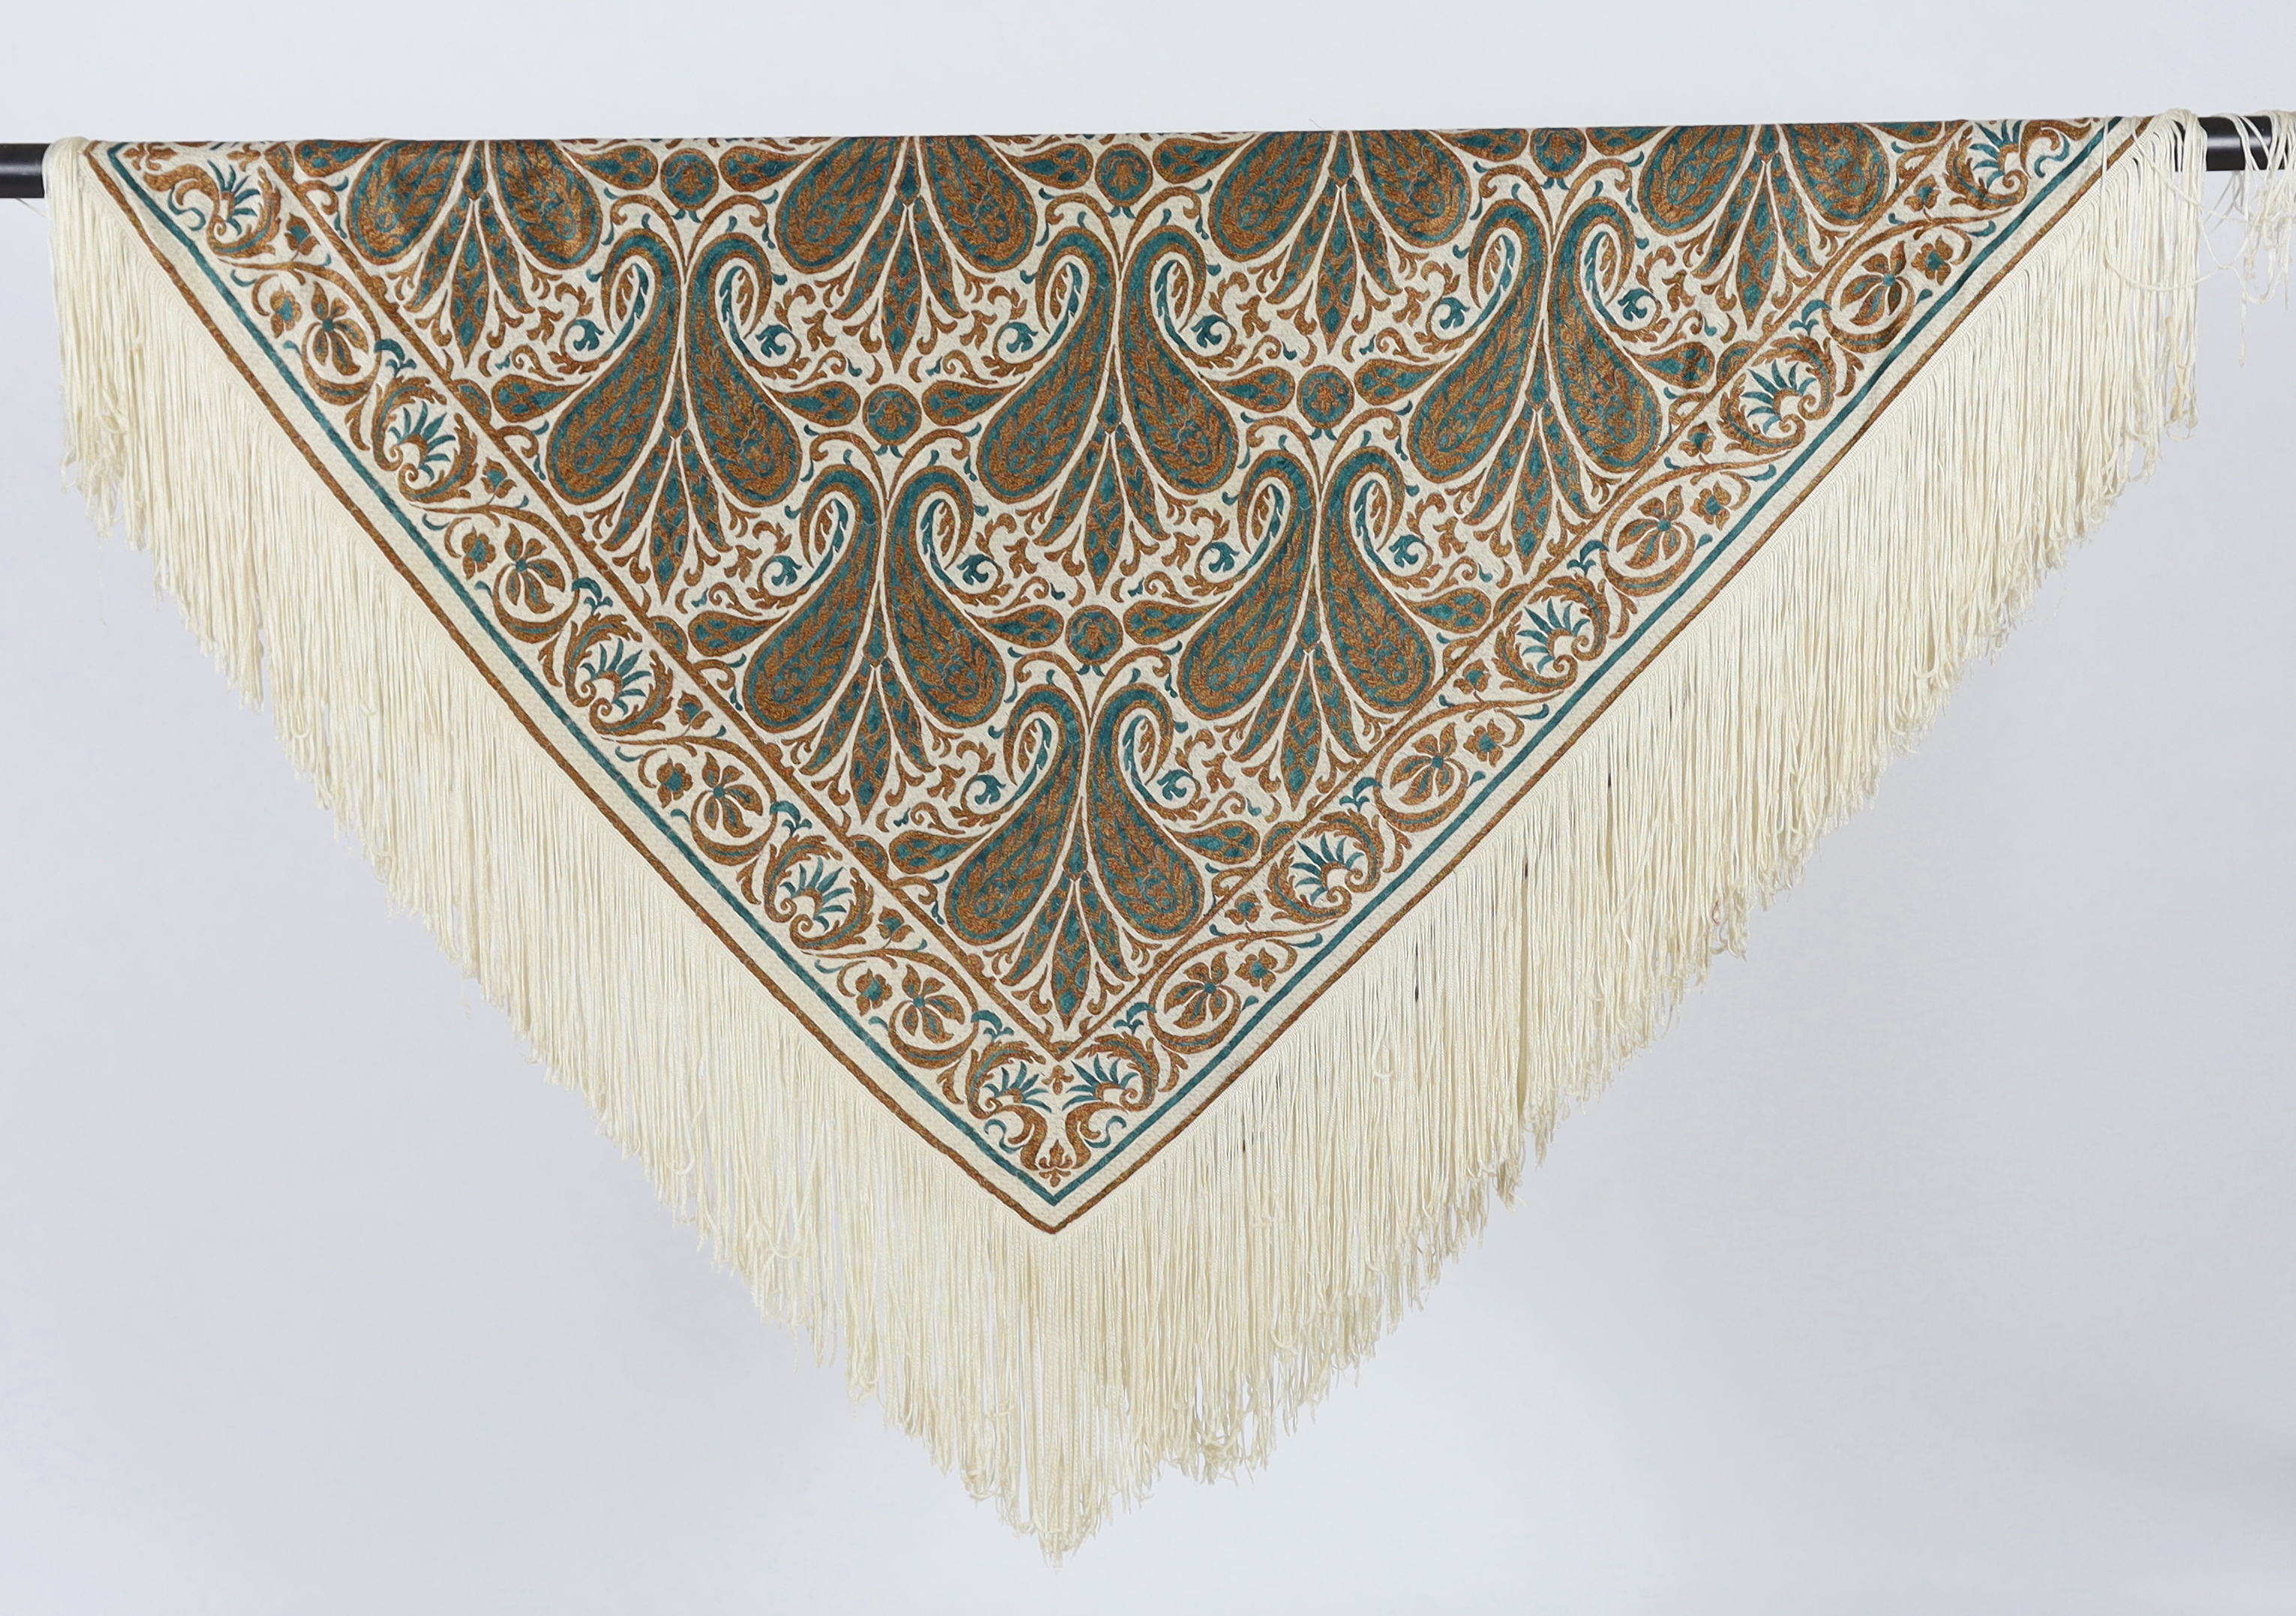 A 1920’s-1930’s cream silk woven shawl, woven with turquoise and bronze coloured silks in an all over tear drop paisley motif, edged with fine knitted cream fringing, approximately 109cm x 120cm